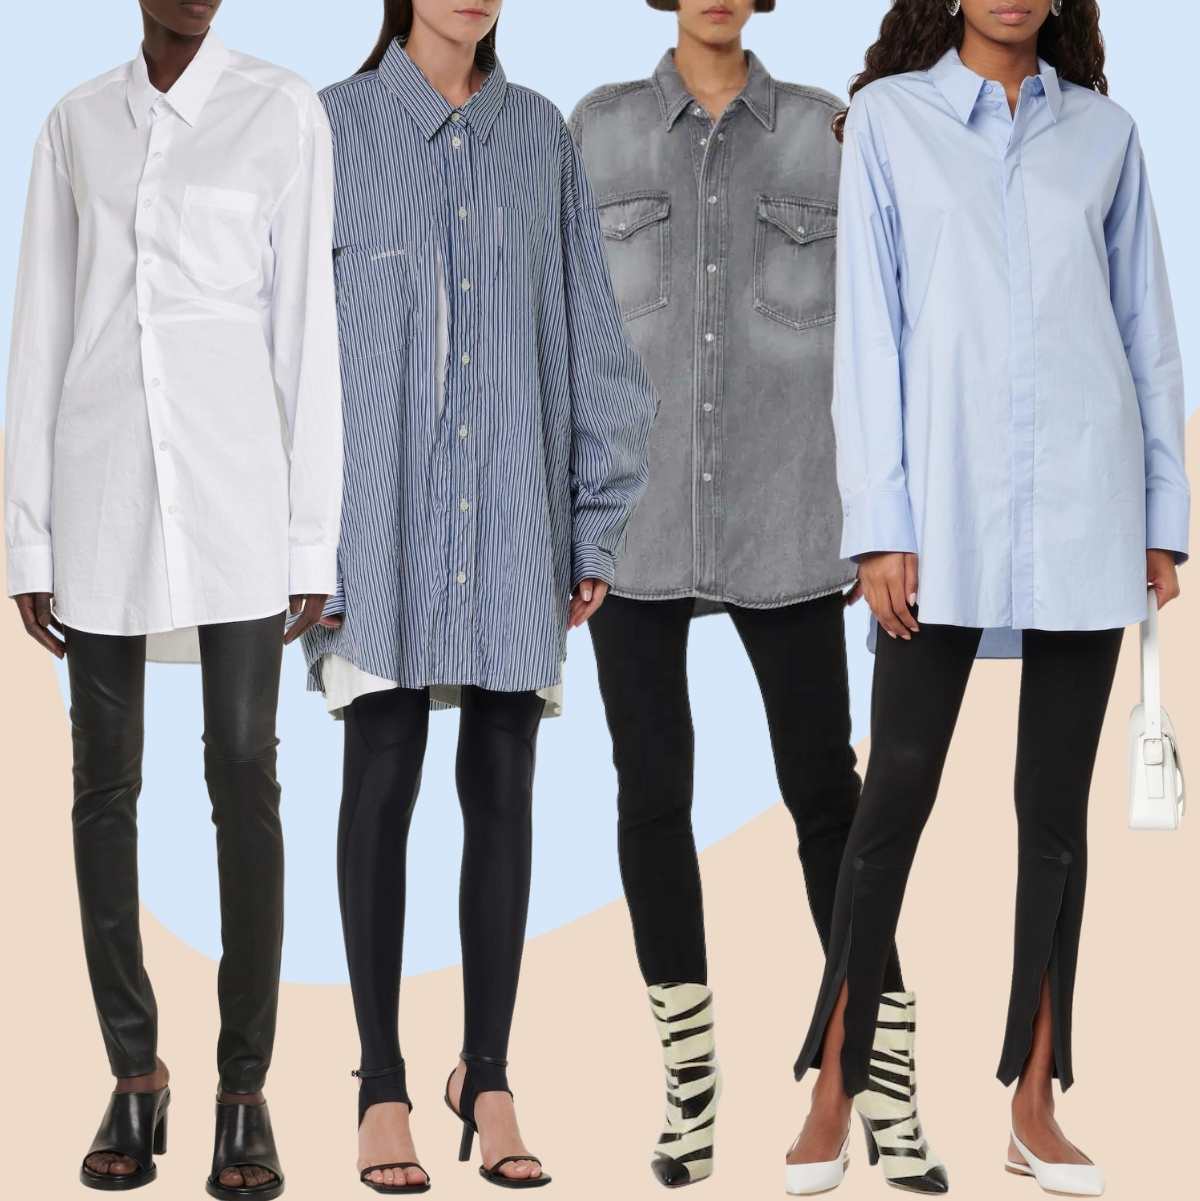 5 Long-Sleeve Shirt and Dress Ideas to Copy This Fall